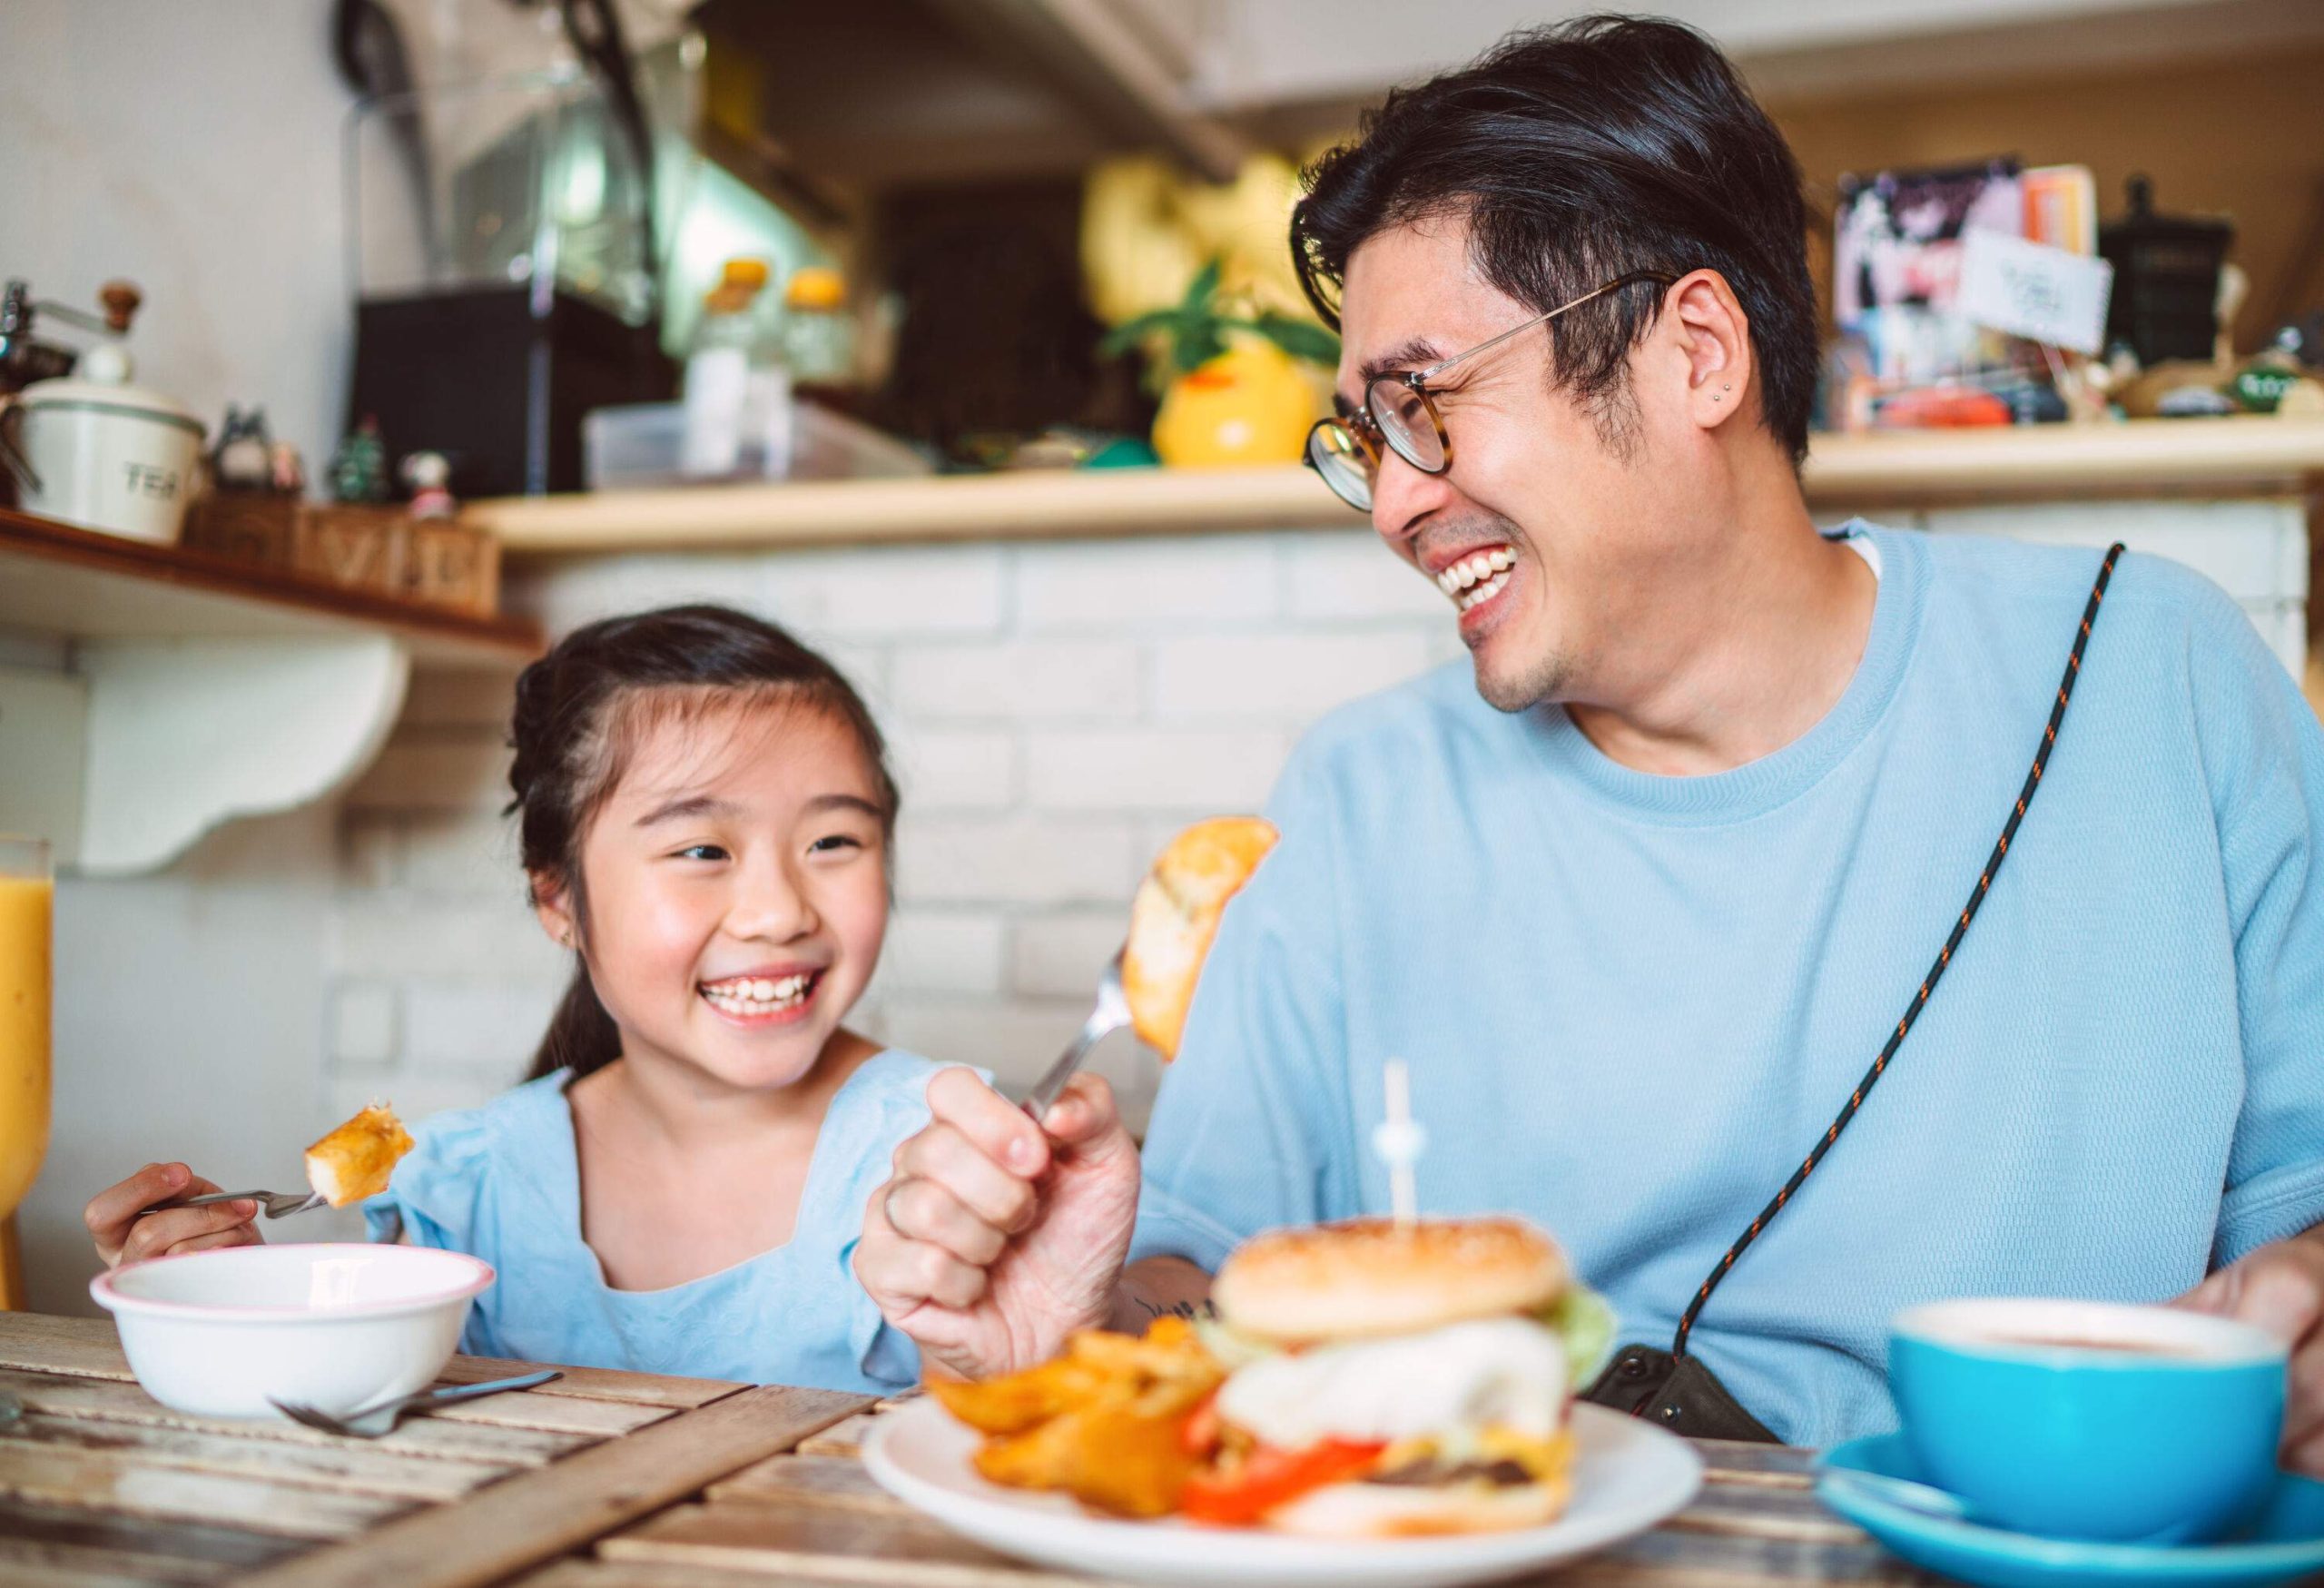 A father and daughter smile at each other while having burger in a restaurant.